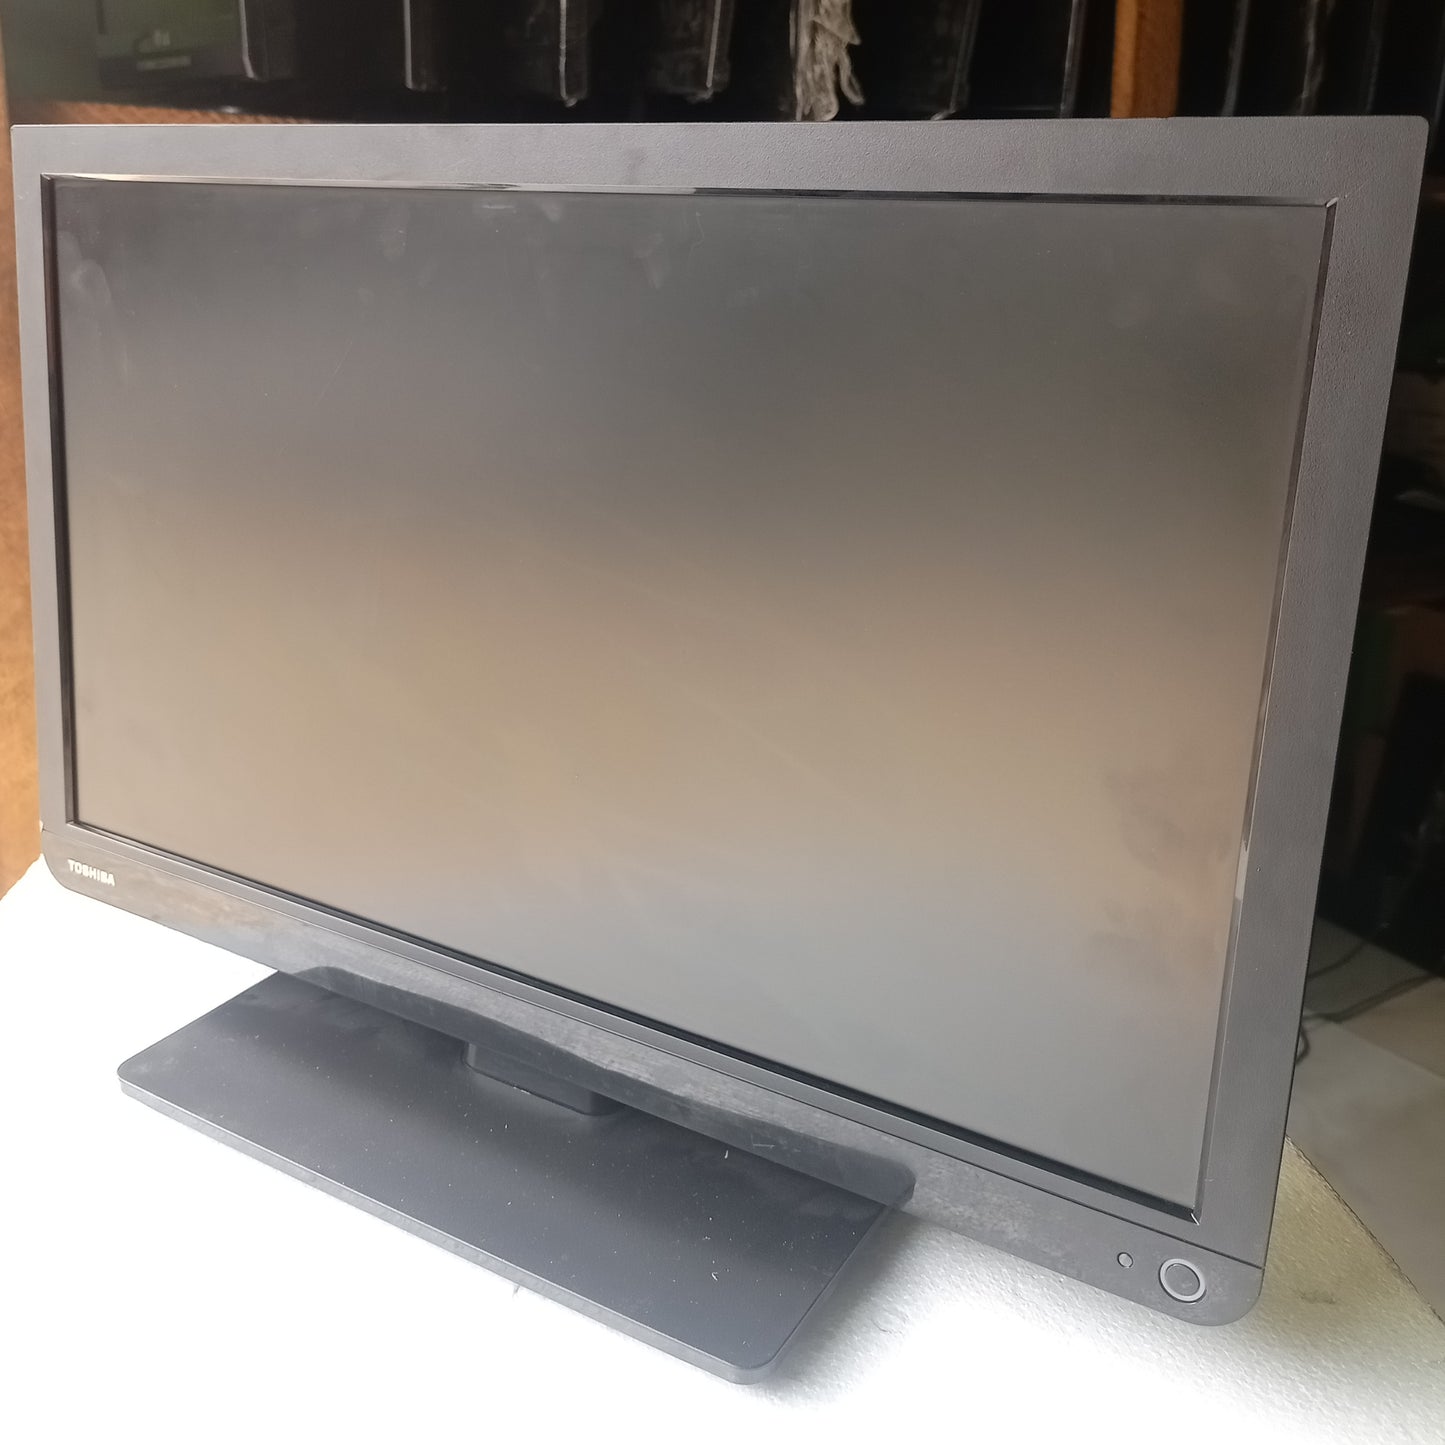 TOSHIBA 22 Inch 22D1333B HD Ready LED TV - Front View